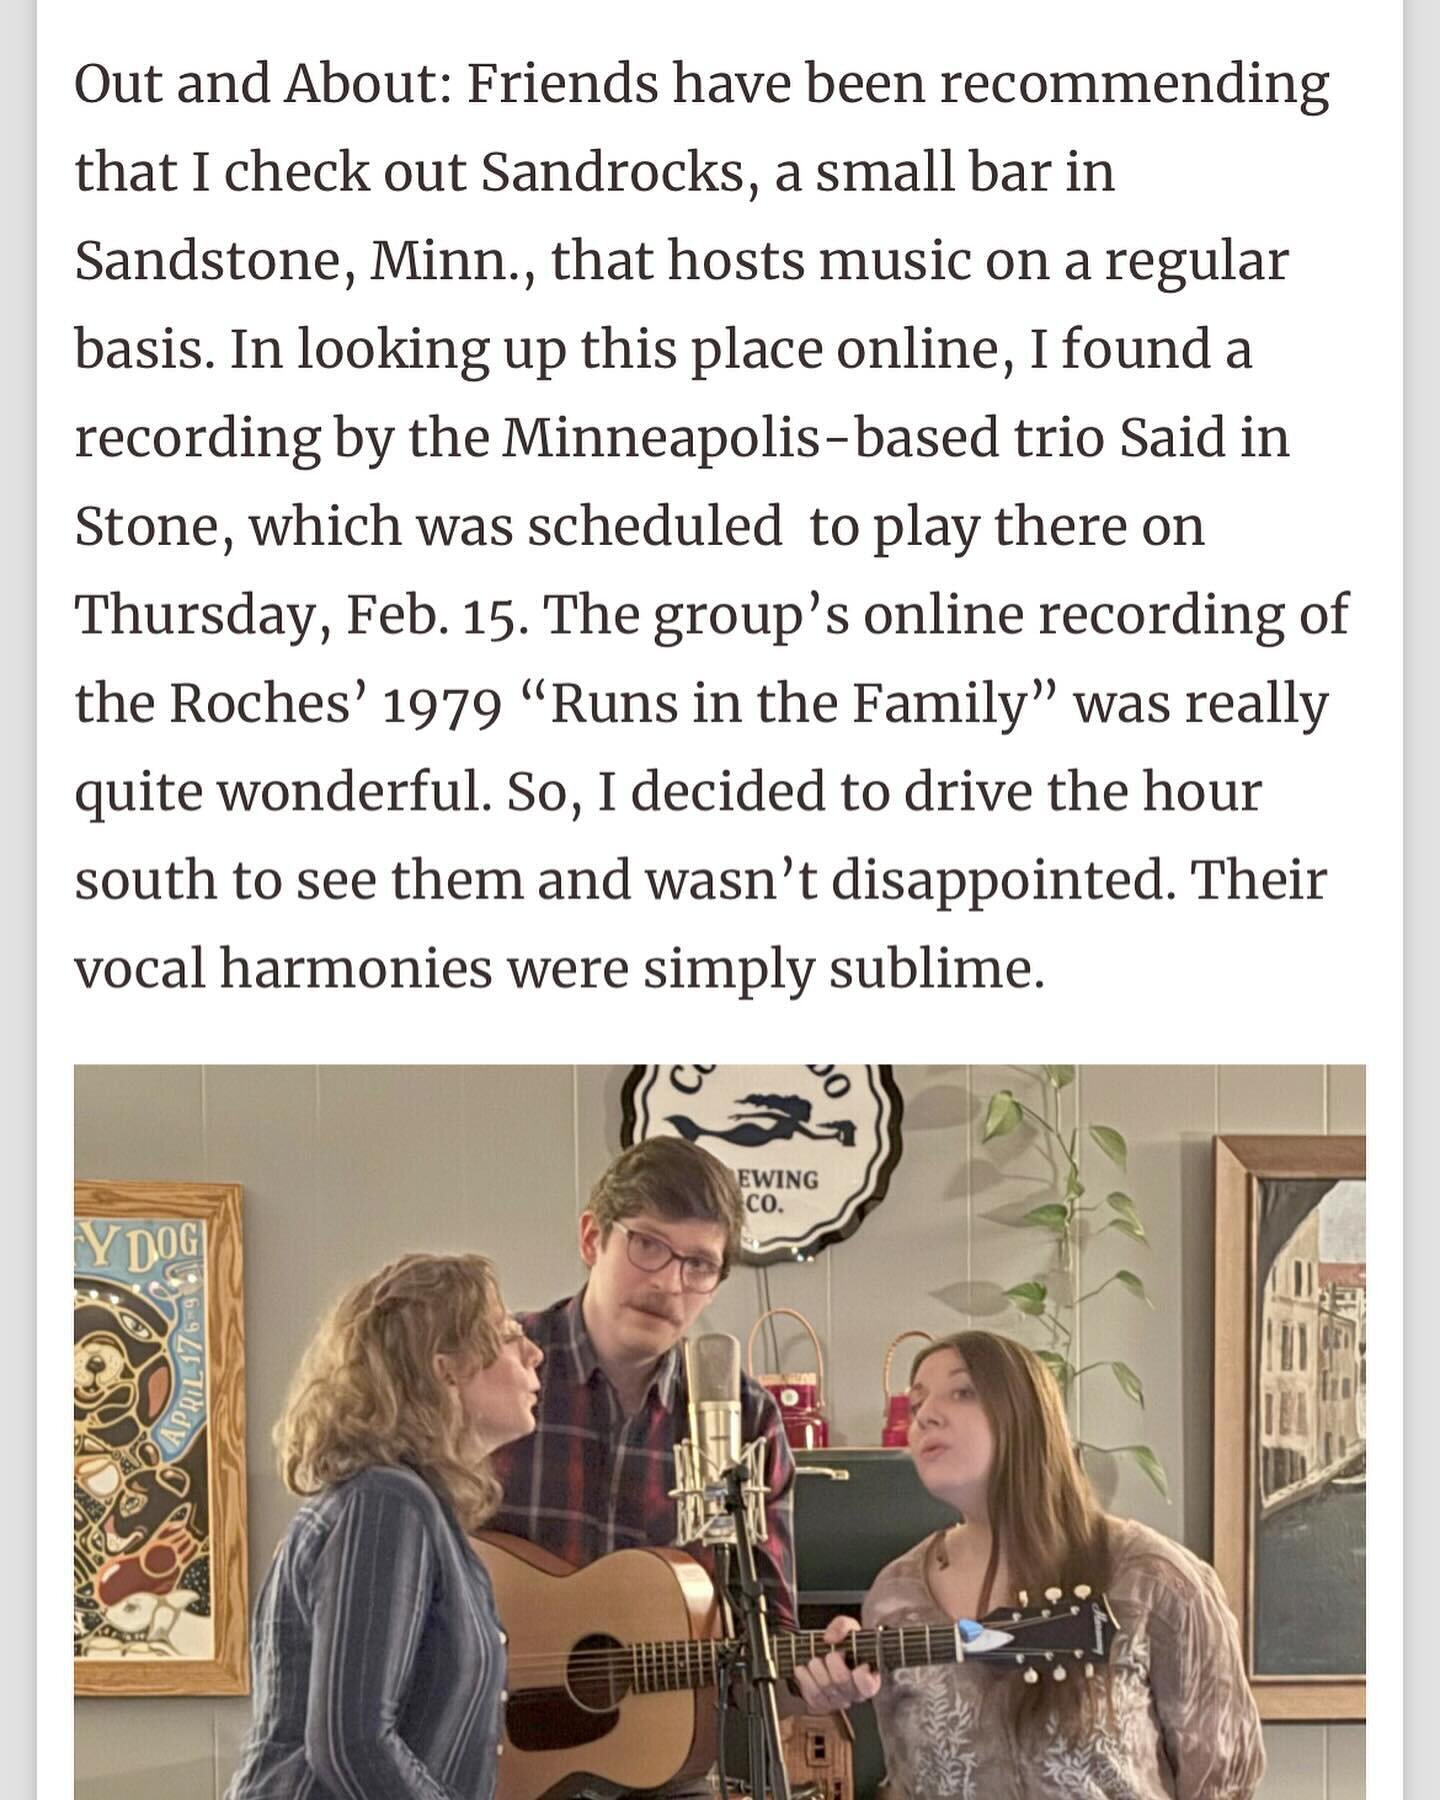 Jill &ldquo;jillybones&rdquo; Fisher wrote some very kind words about us for the @duluthreader about our show at SandRocks last month 🥰🥰🥰